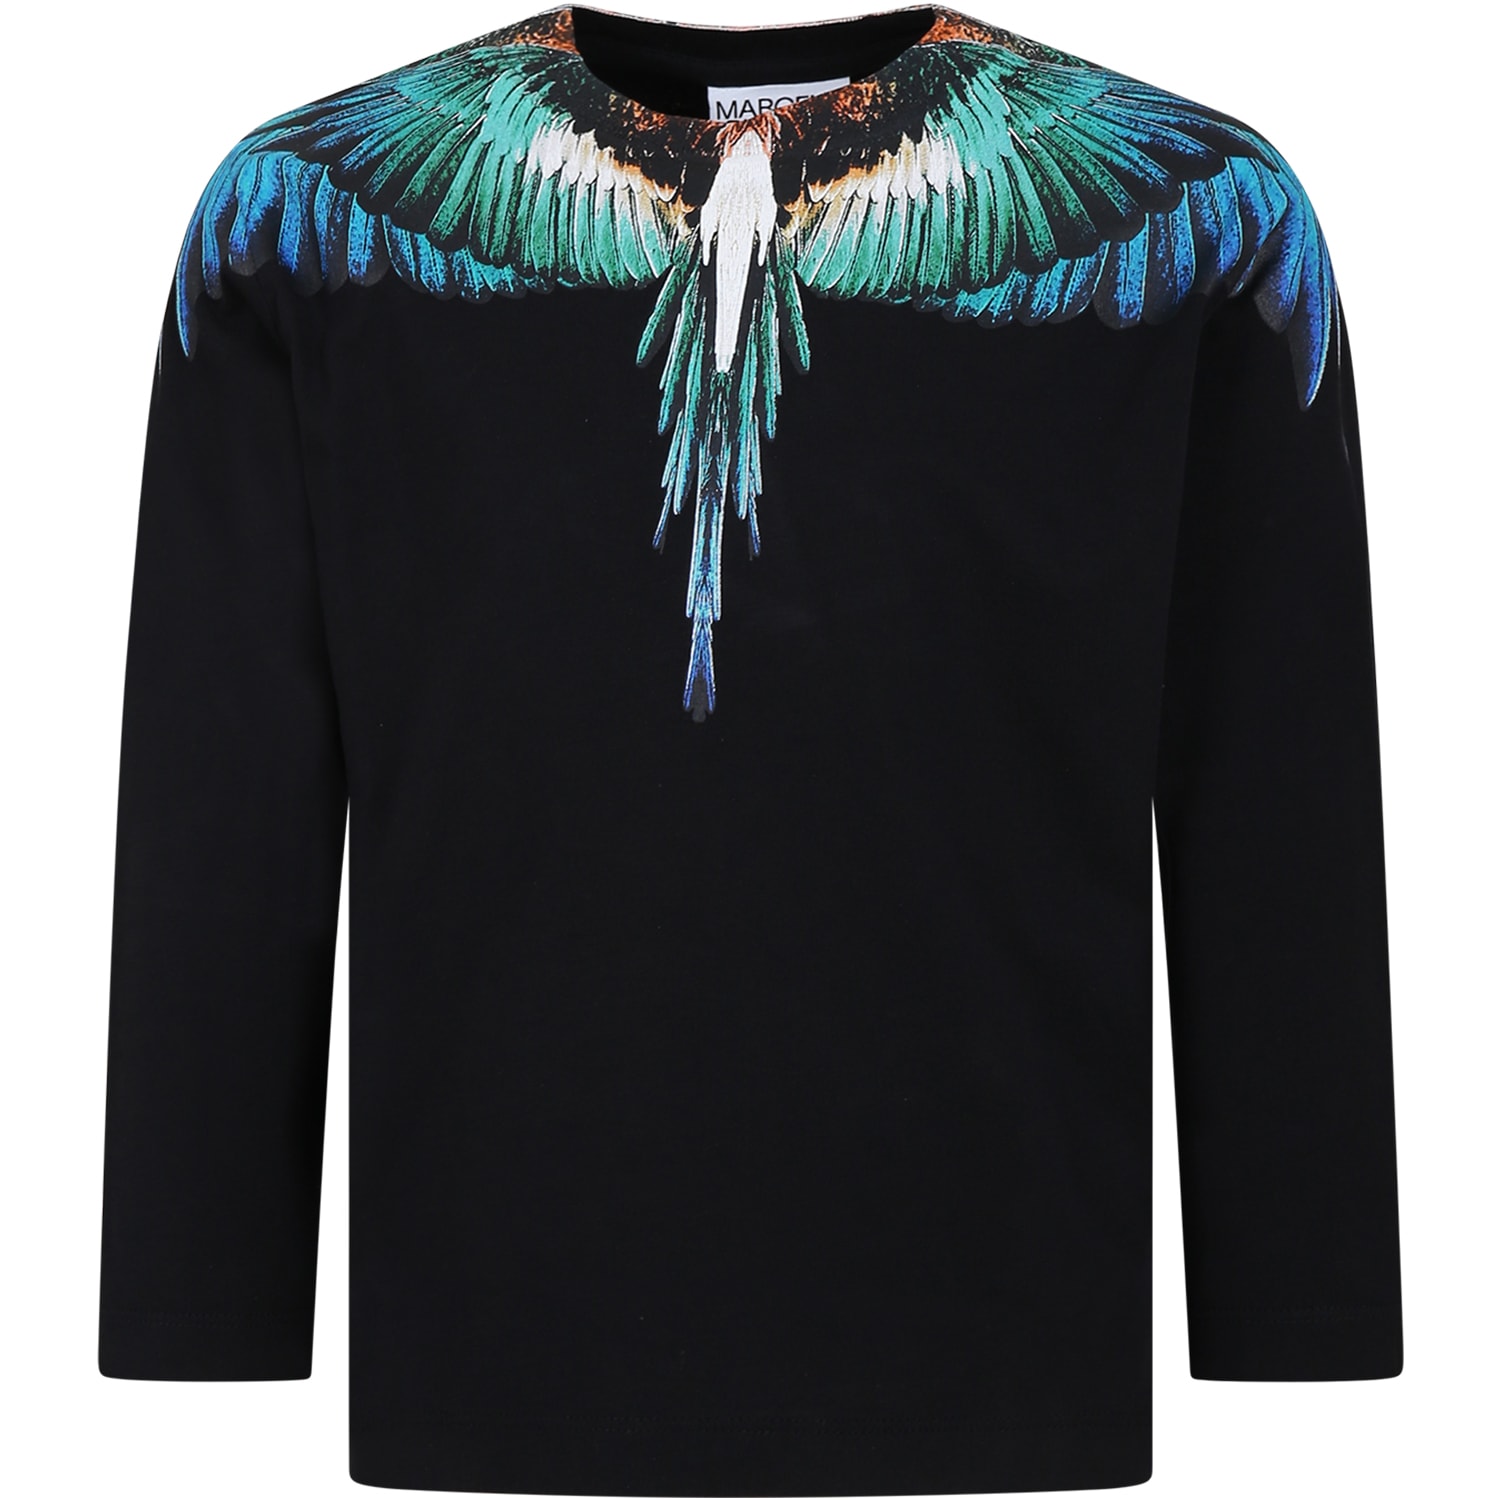 MARCELO BURLON COUNTY OF MILAN BLACK T-SHIRT FOR BOY WITH WINGS